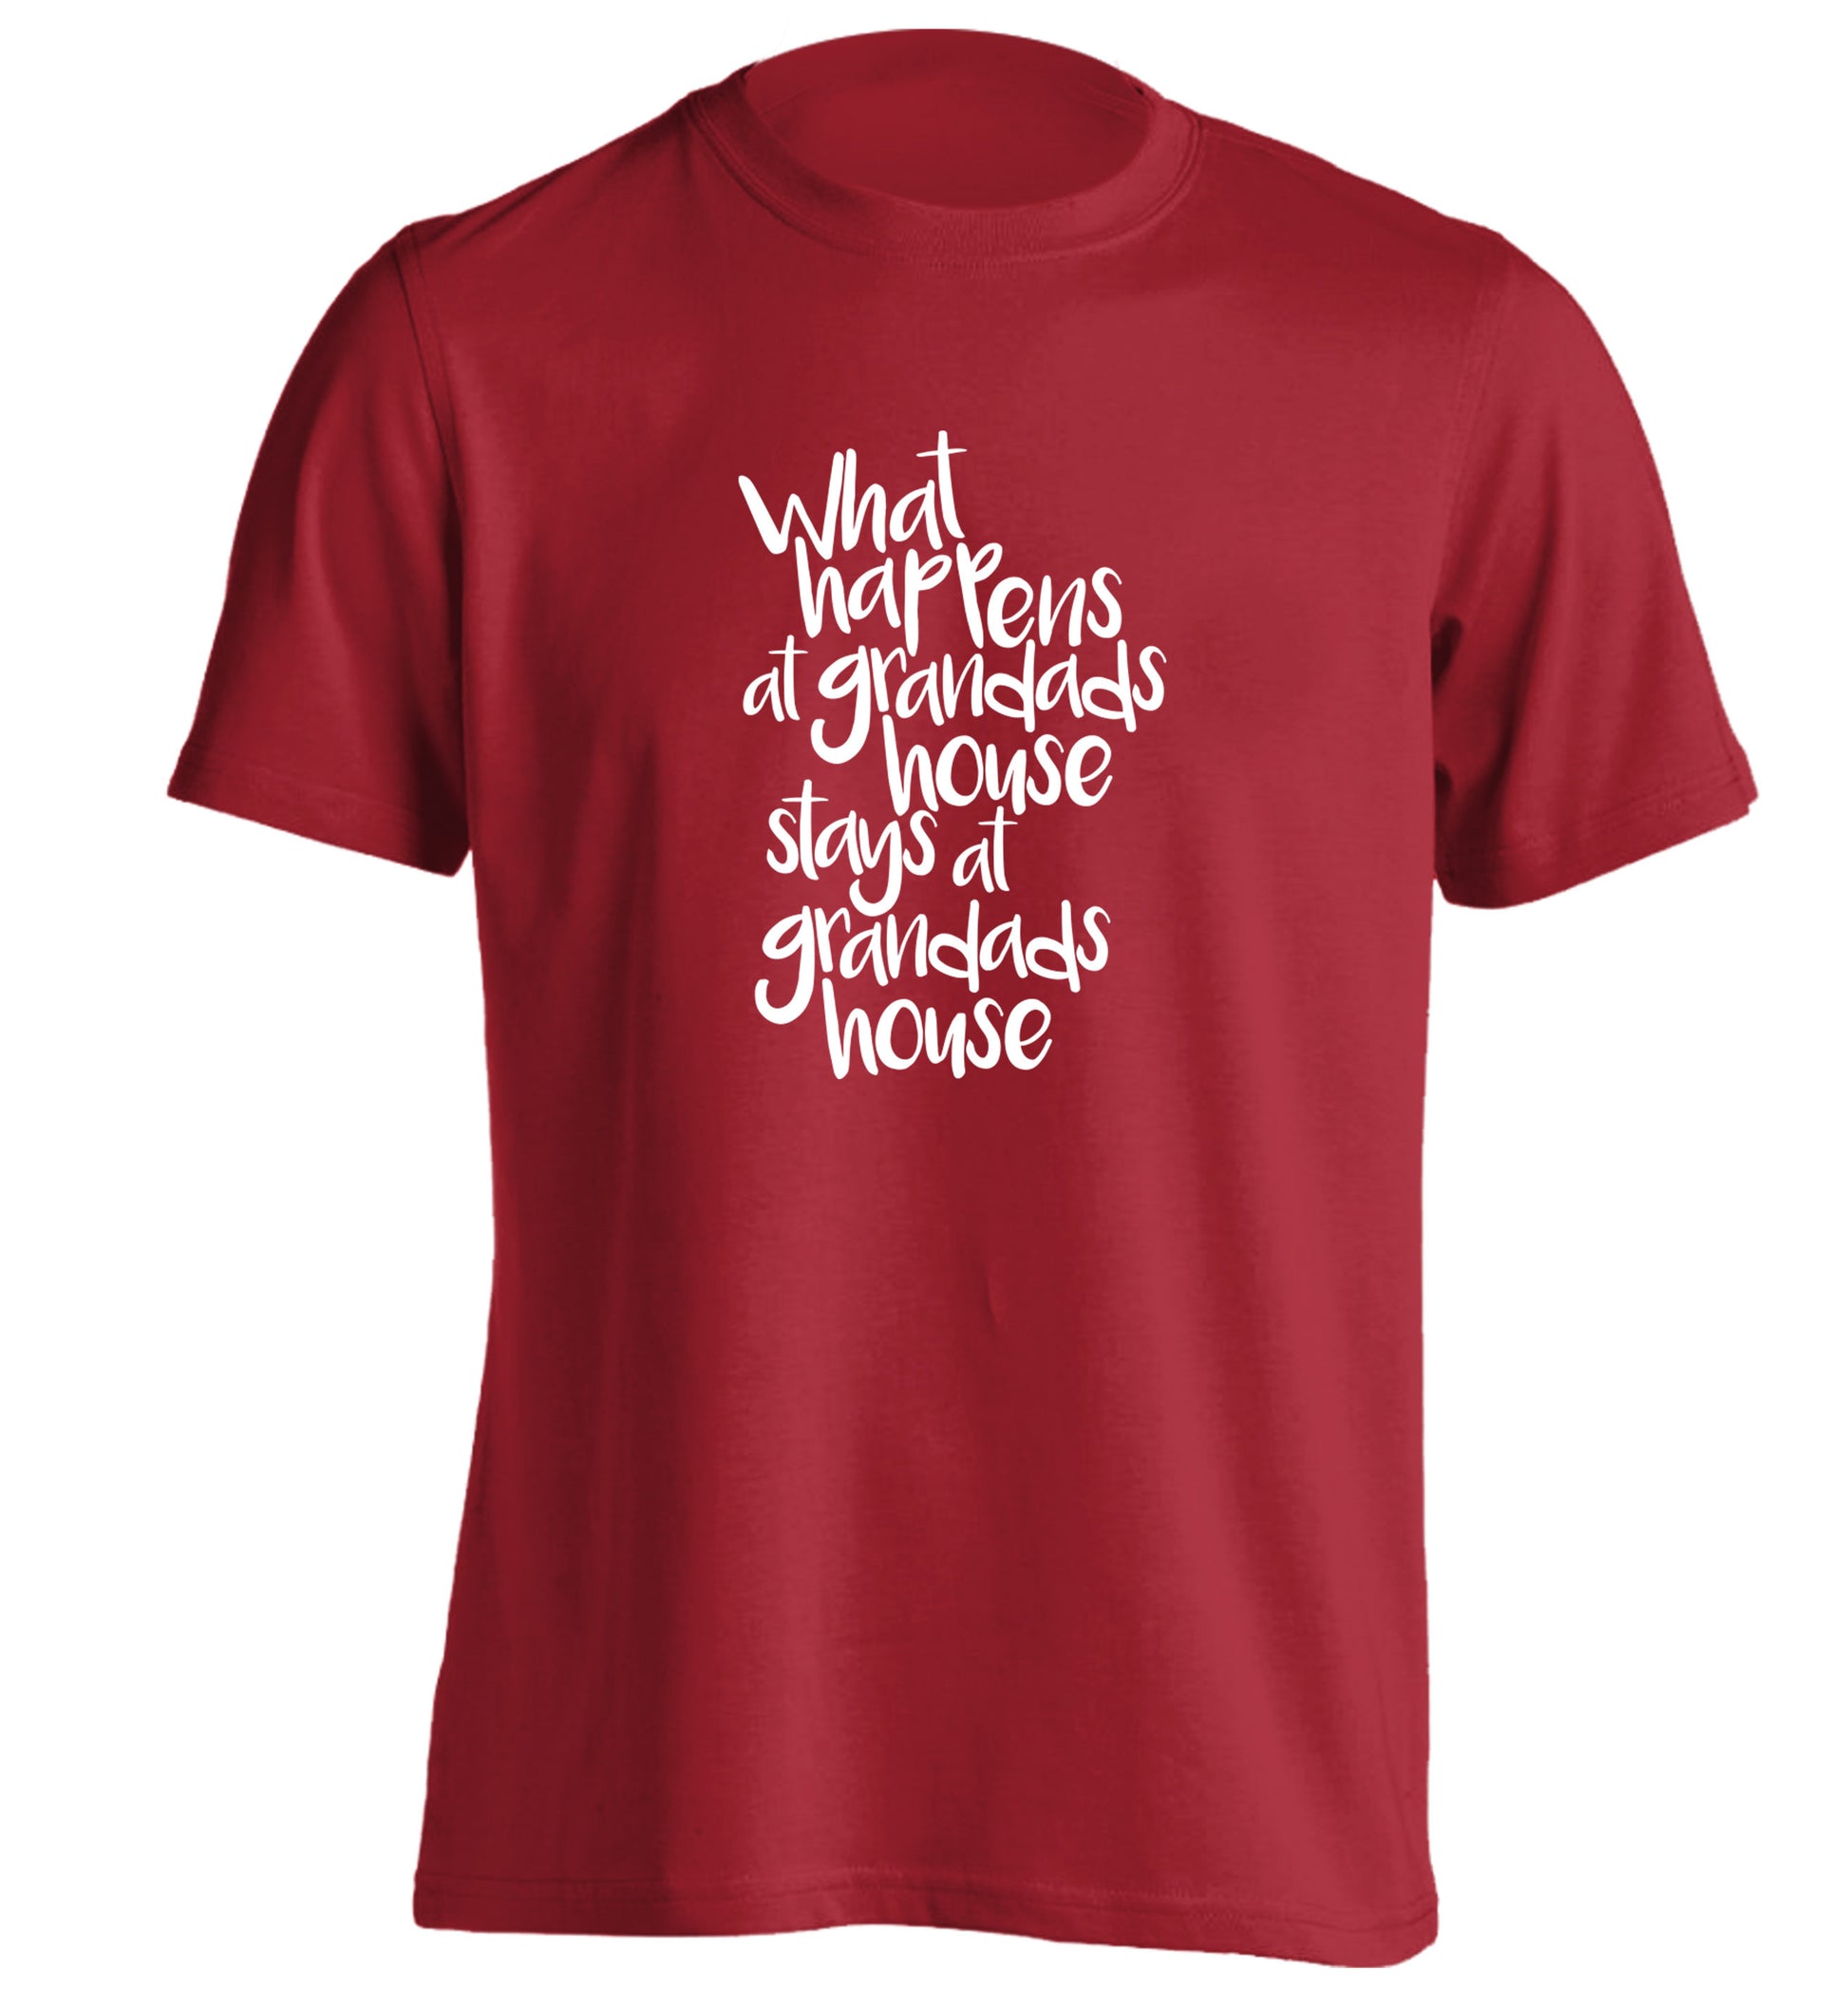 What happens at grandads house stays at grandads house adults unisex red Tshirt 2XL